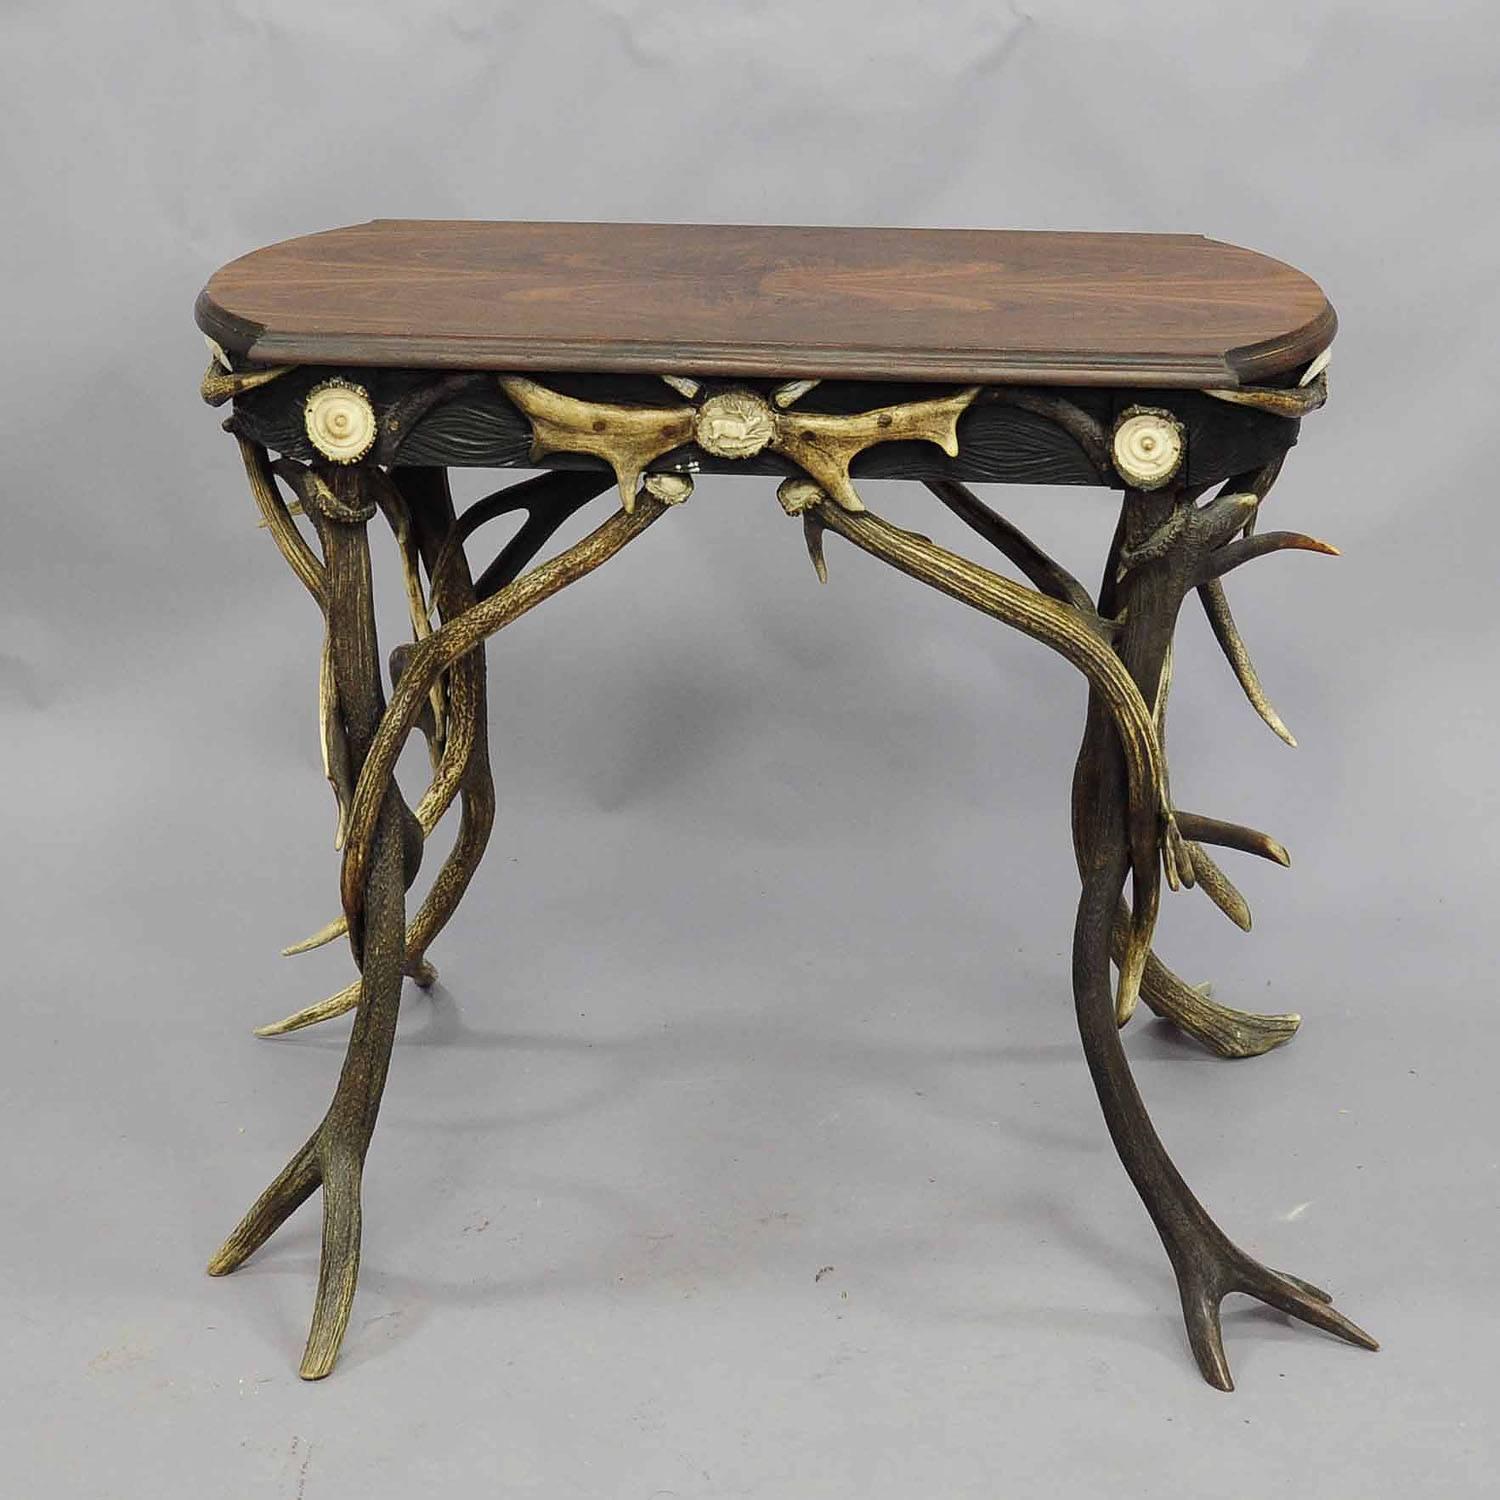 Carved Superb Antler Side Table with great Decorations, circa 1890